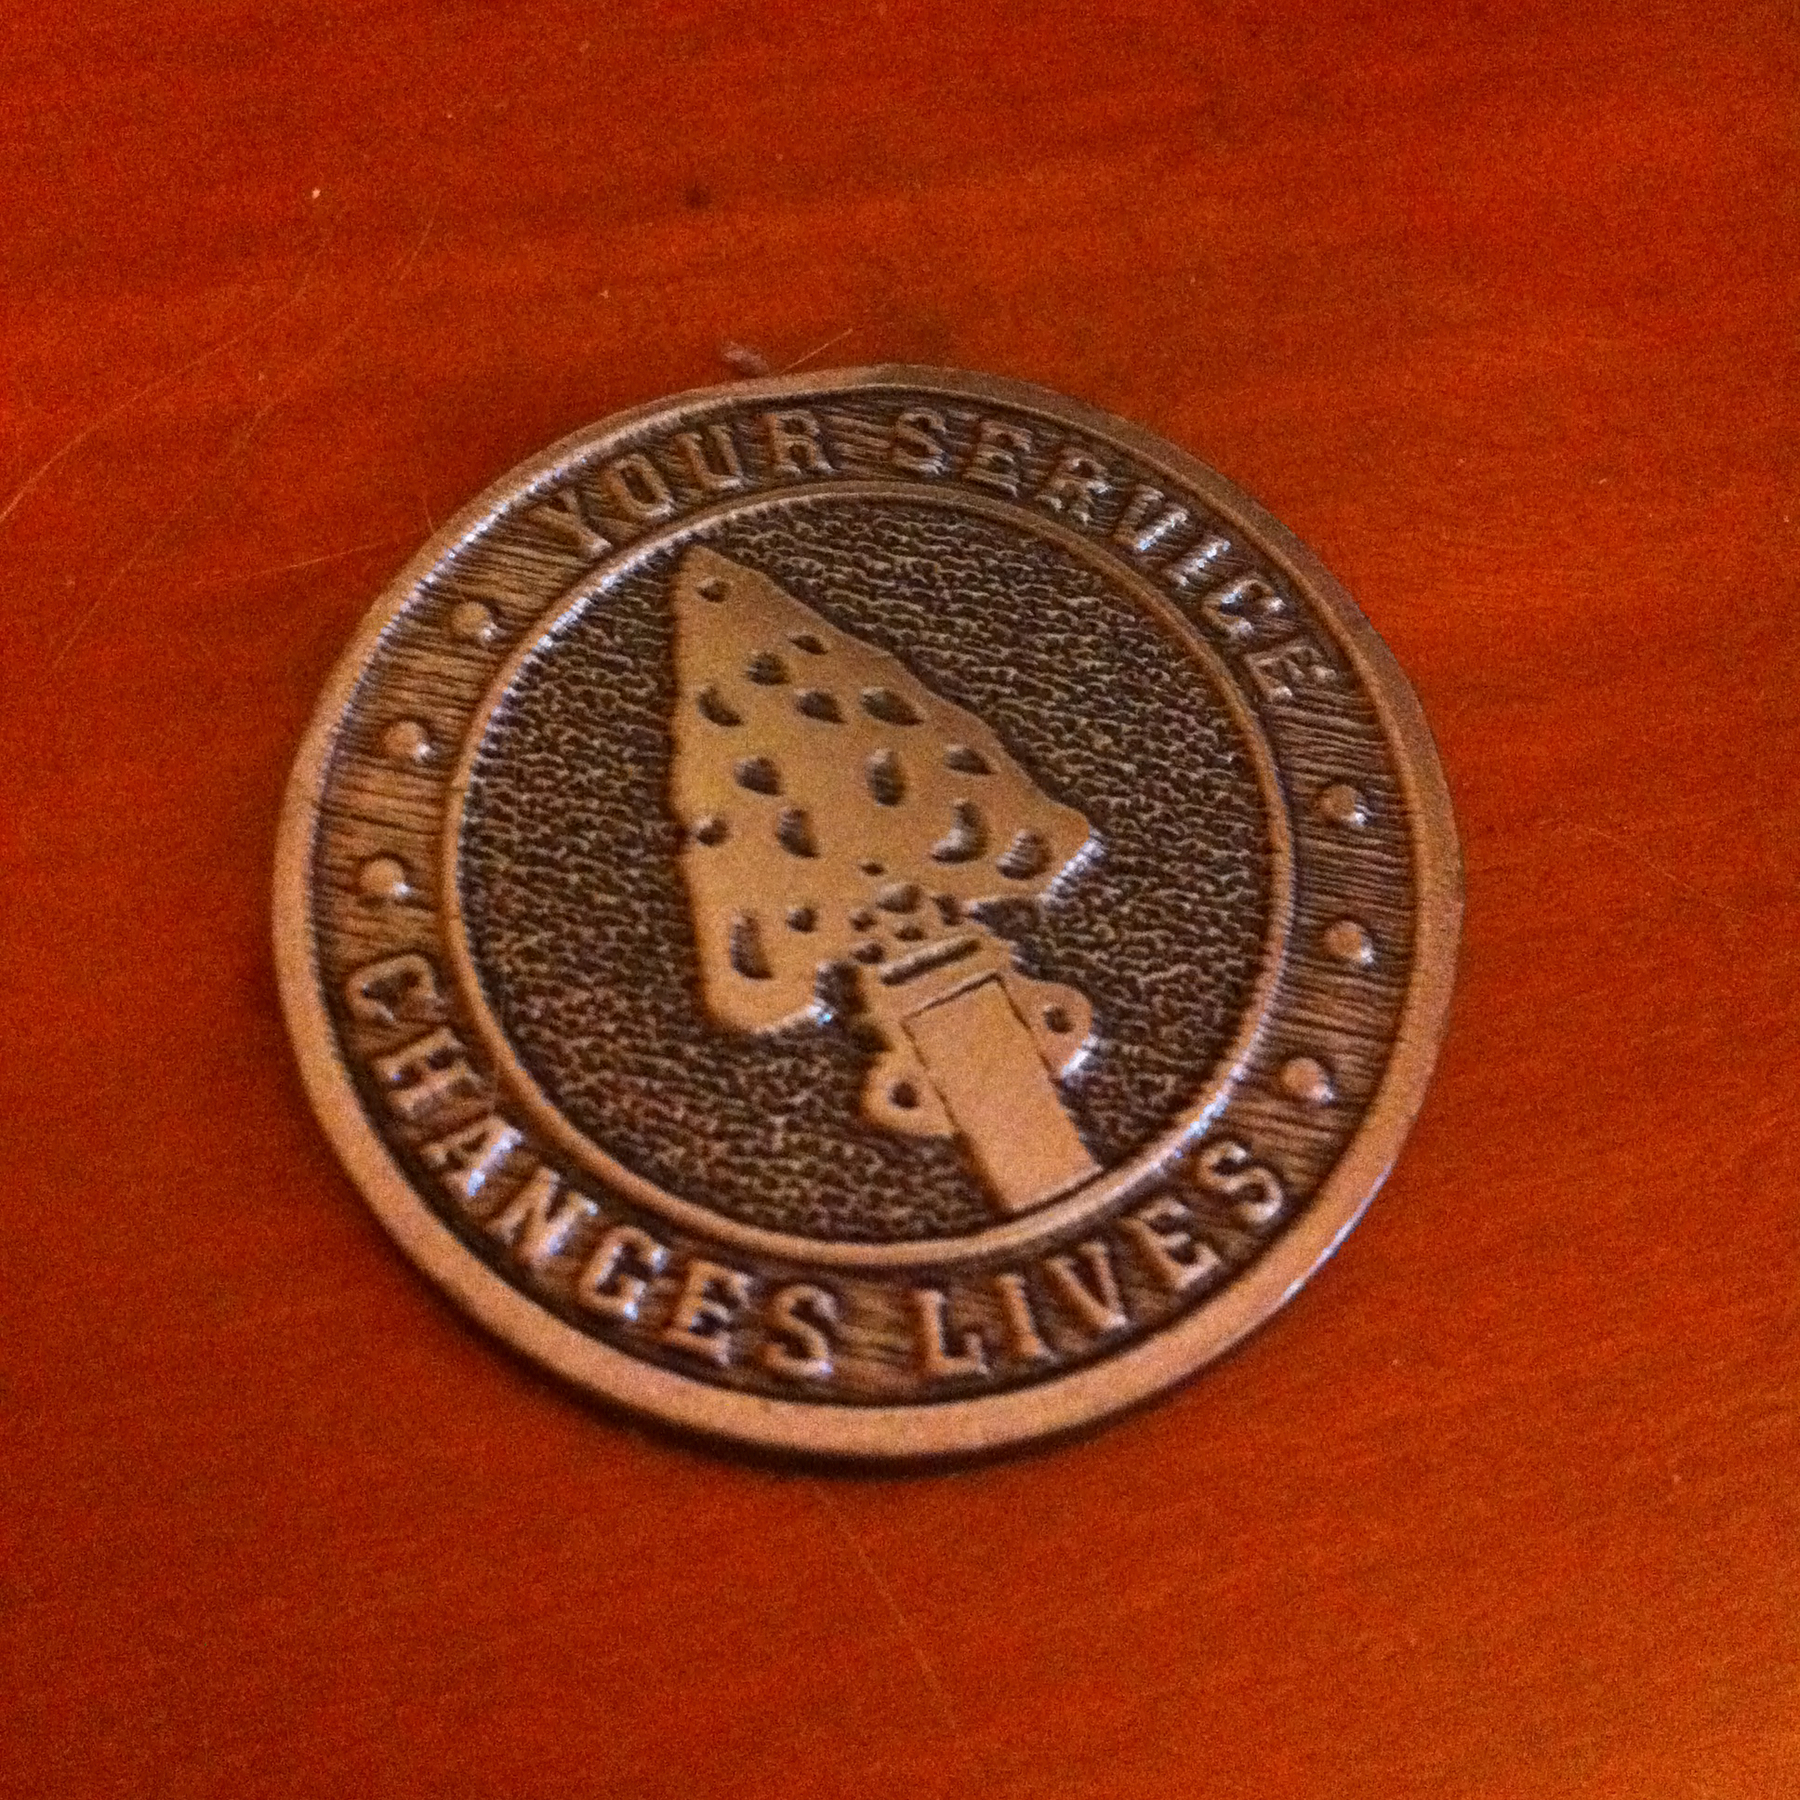 A coin depicting an arrowhead with the inscription, “Your service changes lives.”